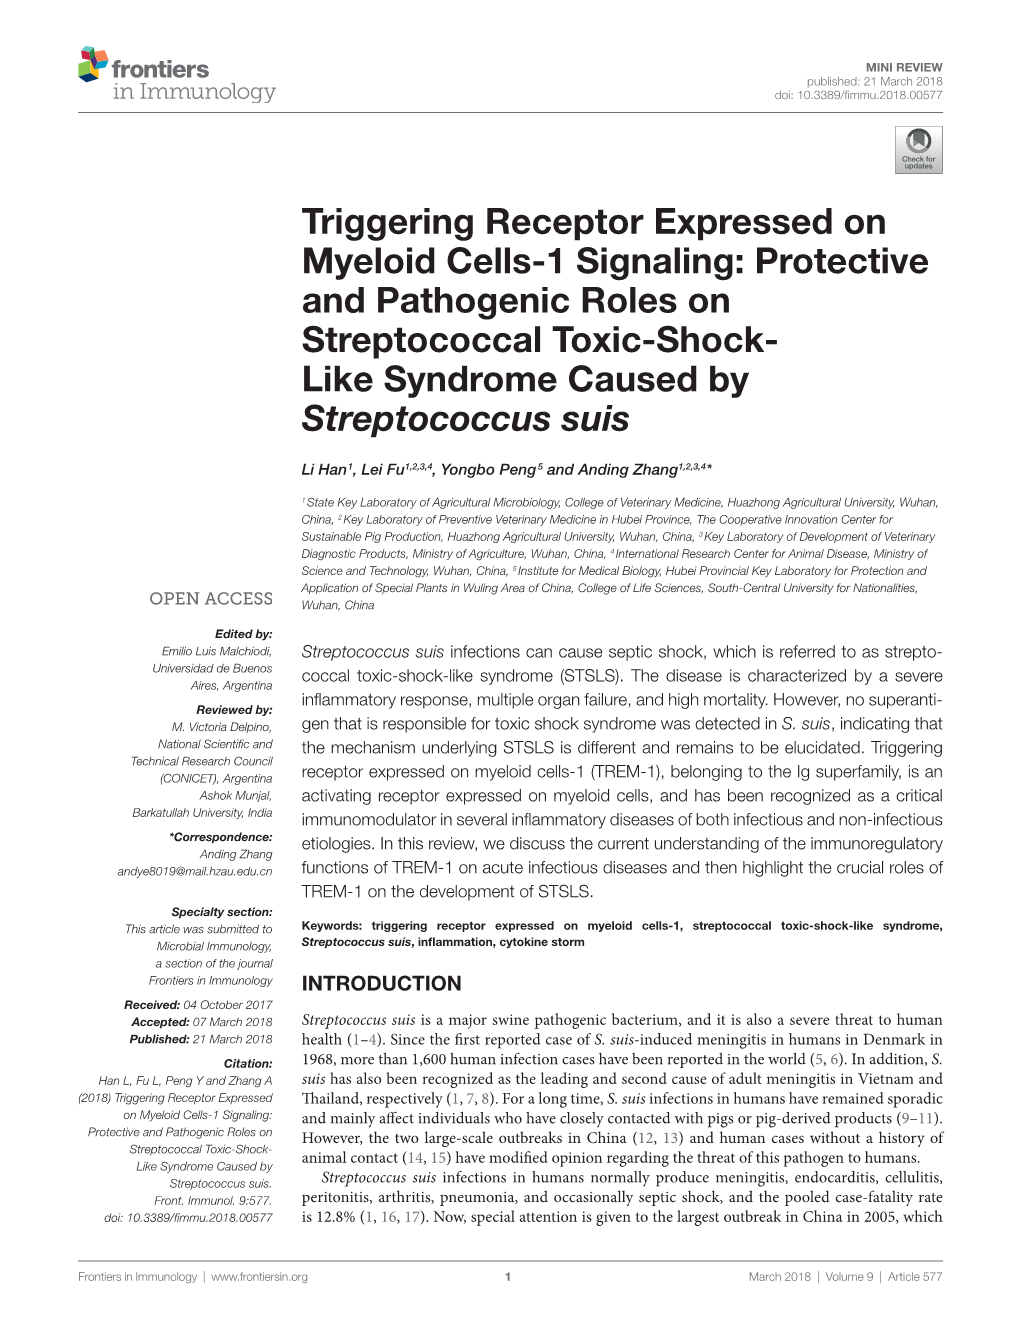 Triggering Receptor Expressed on Myeloid Cells-1 Signaling: Protective and Pathogenic Roles on Streptococcal Toxic-Shock- Like Syndrome Caused by Streptococcus Suis